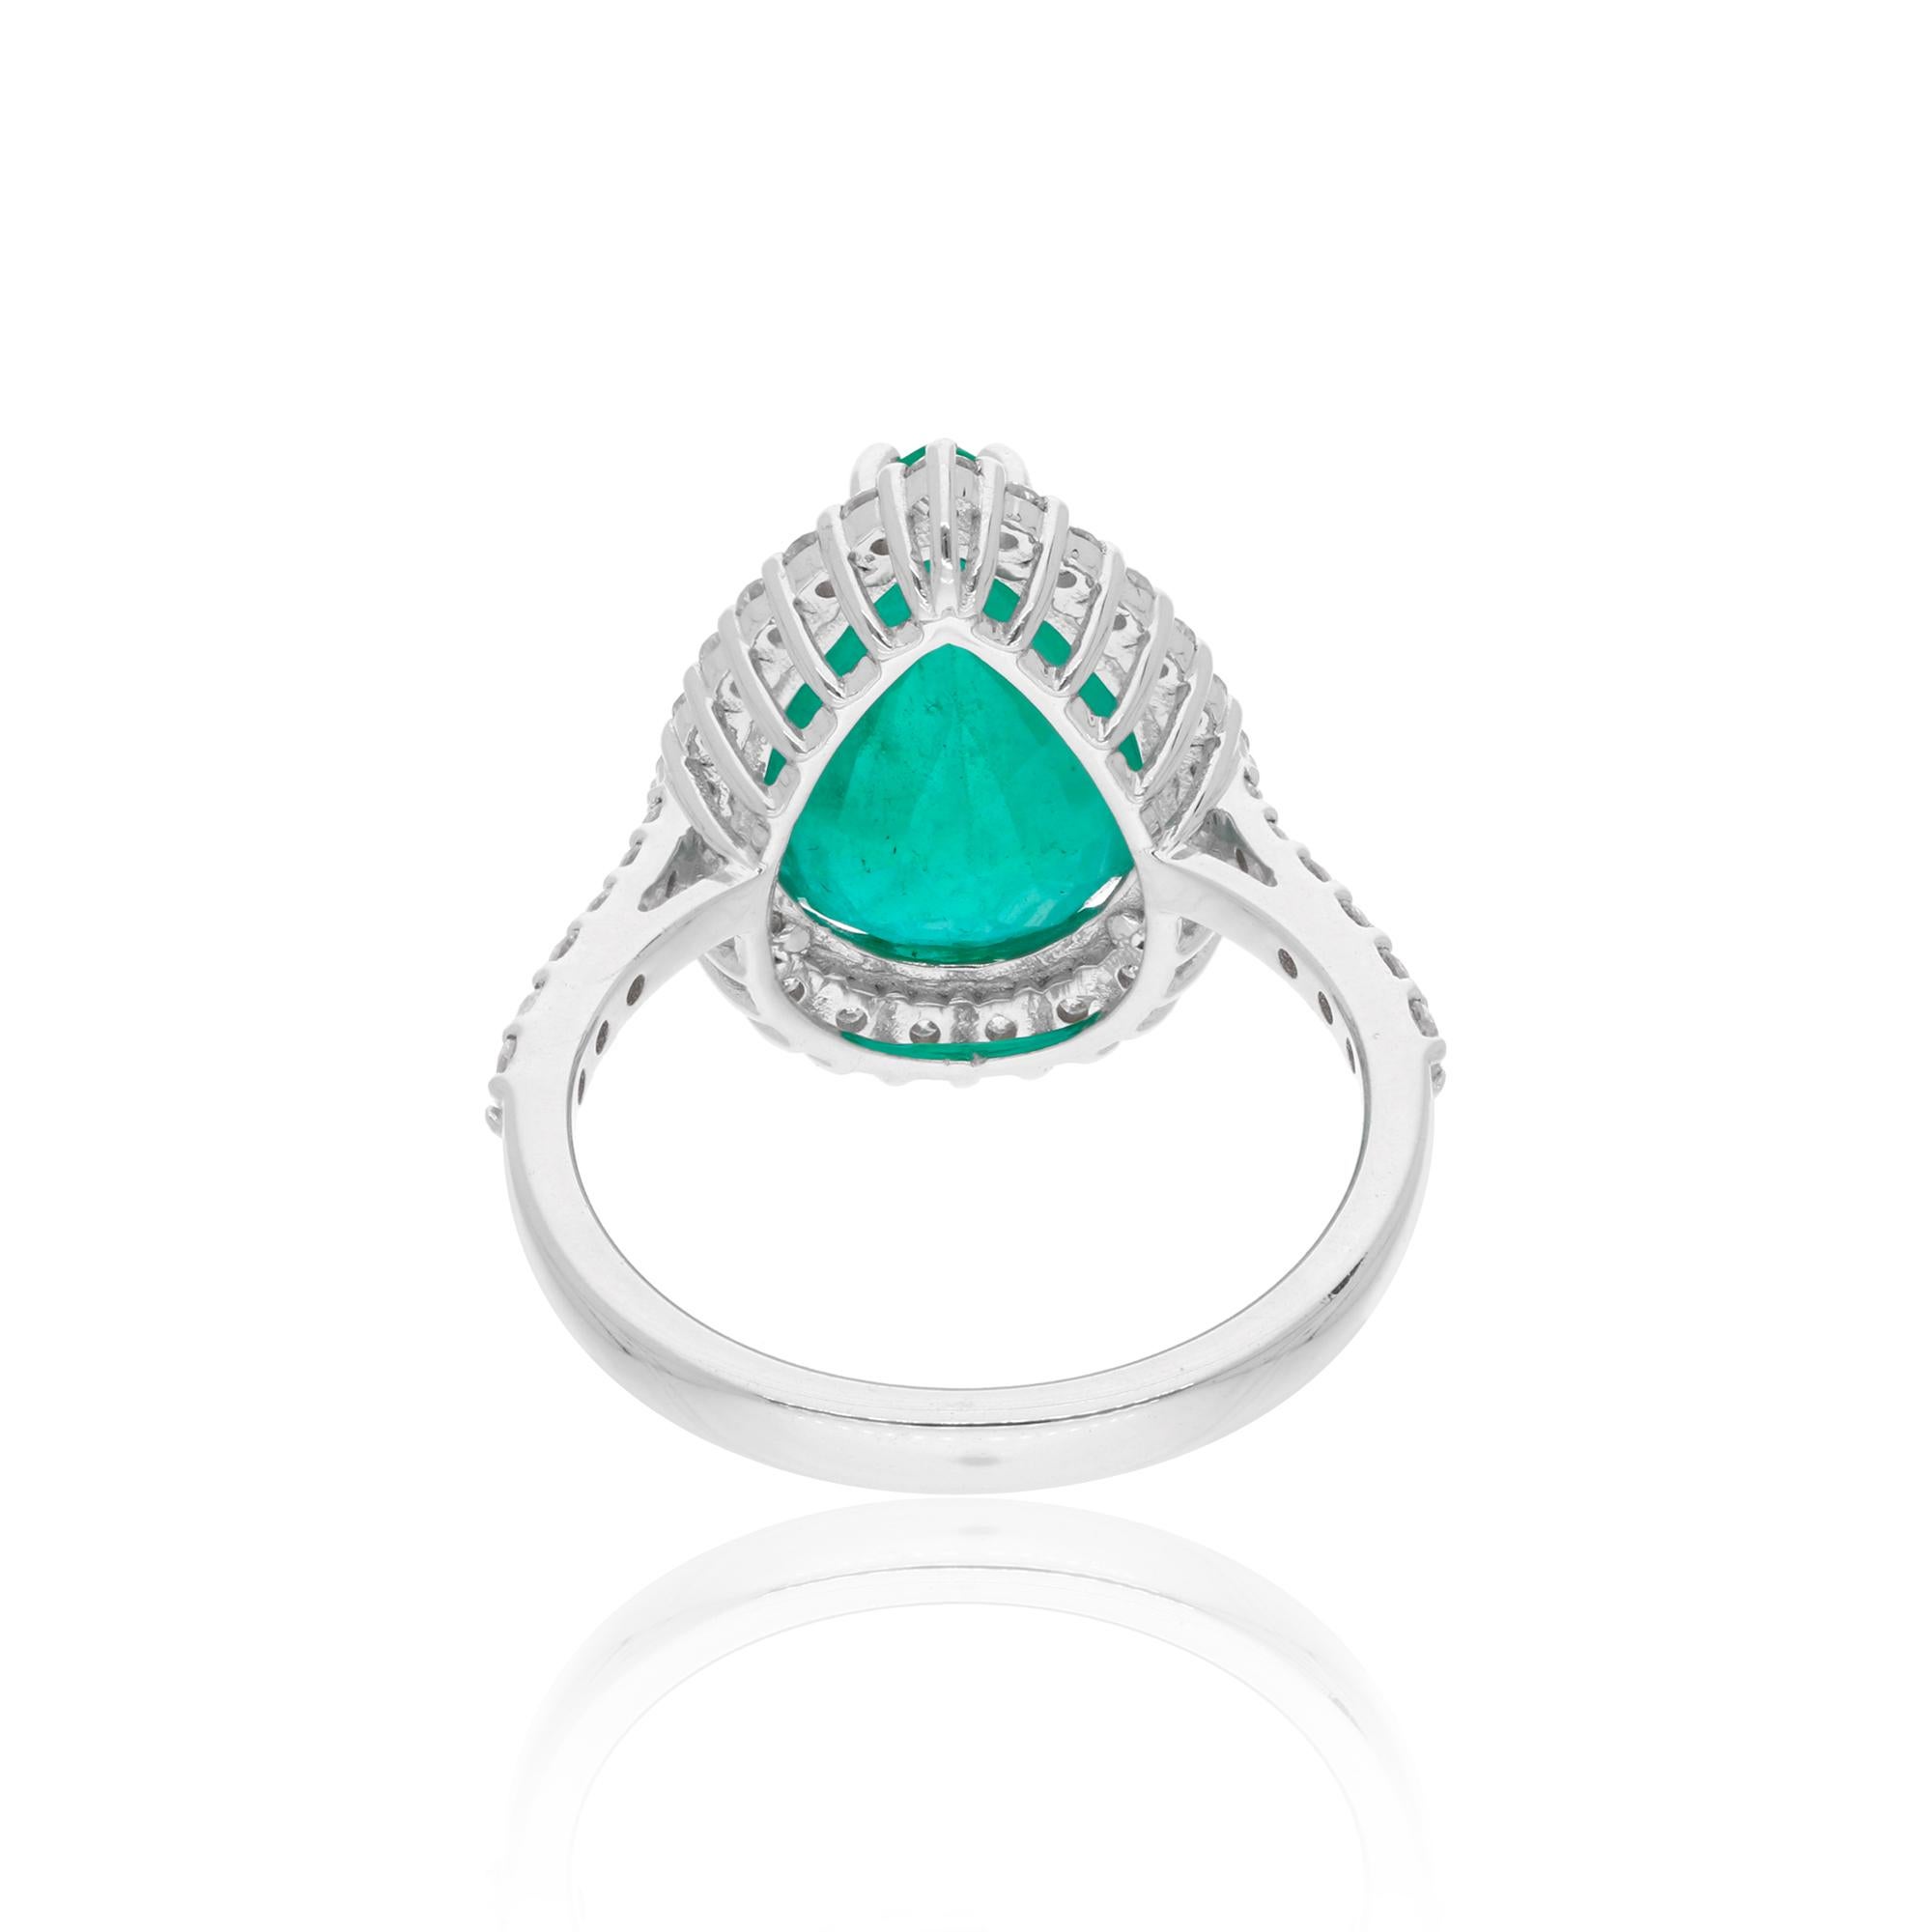 This Dainty Diamond Emerald Ring with 0.65 ct. Genuine Diamonds & 5.18 ct. Natural Emerald is a promise of perfection and purity. This Ring is set in 18k Solid White Gold. You can choose this ring in 10k/14k/18k, Rose Gold/White Gold/Yellow